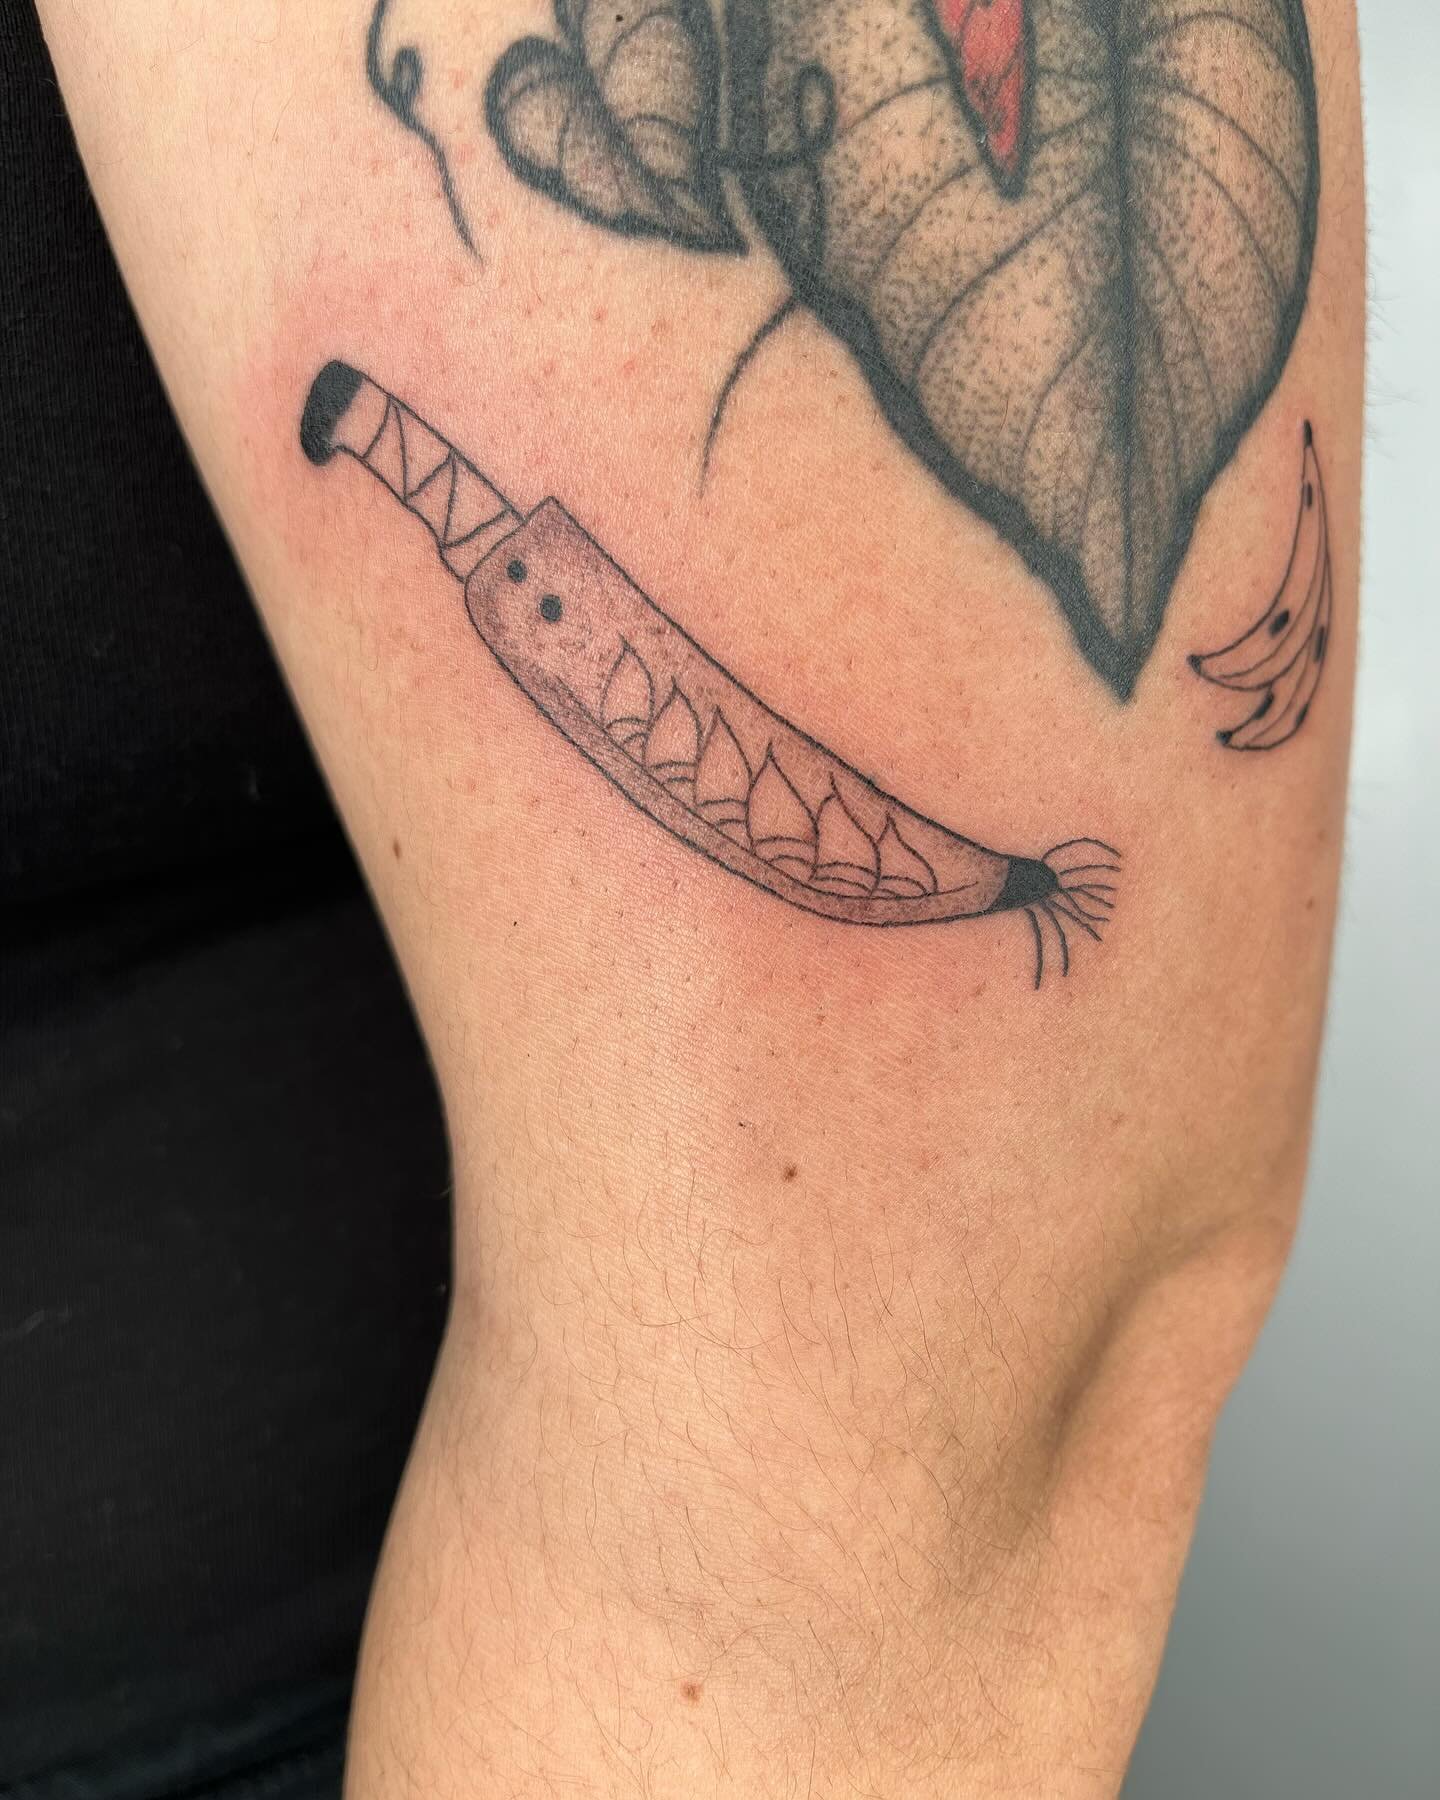 Sweet Lil machete (corbo) and platanos from my Salvi Flash. I did these while guesting in Chicago! Done @dwellingtattoo ☺️! Thank you Amanda for the trust 🥰. 
.
.
.
#latattooshop #latattooartist #latattoos #eastlatattooartist #tattoolosangeles #chic